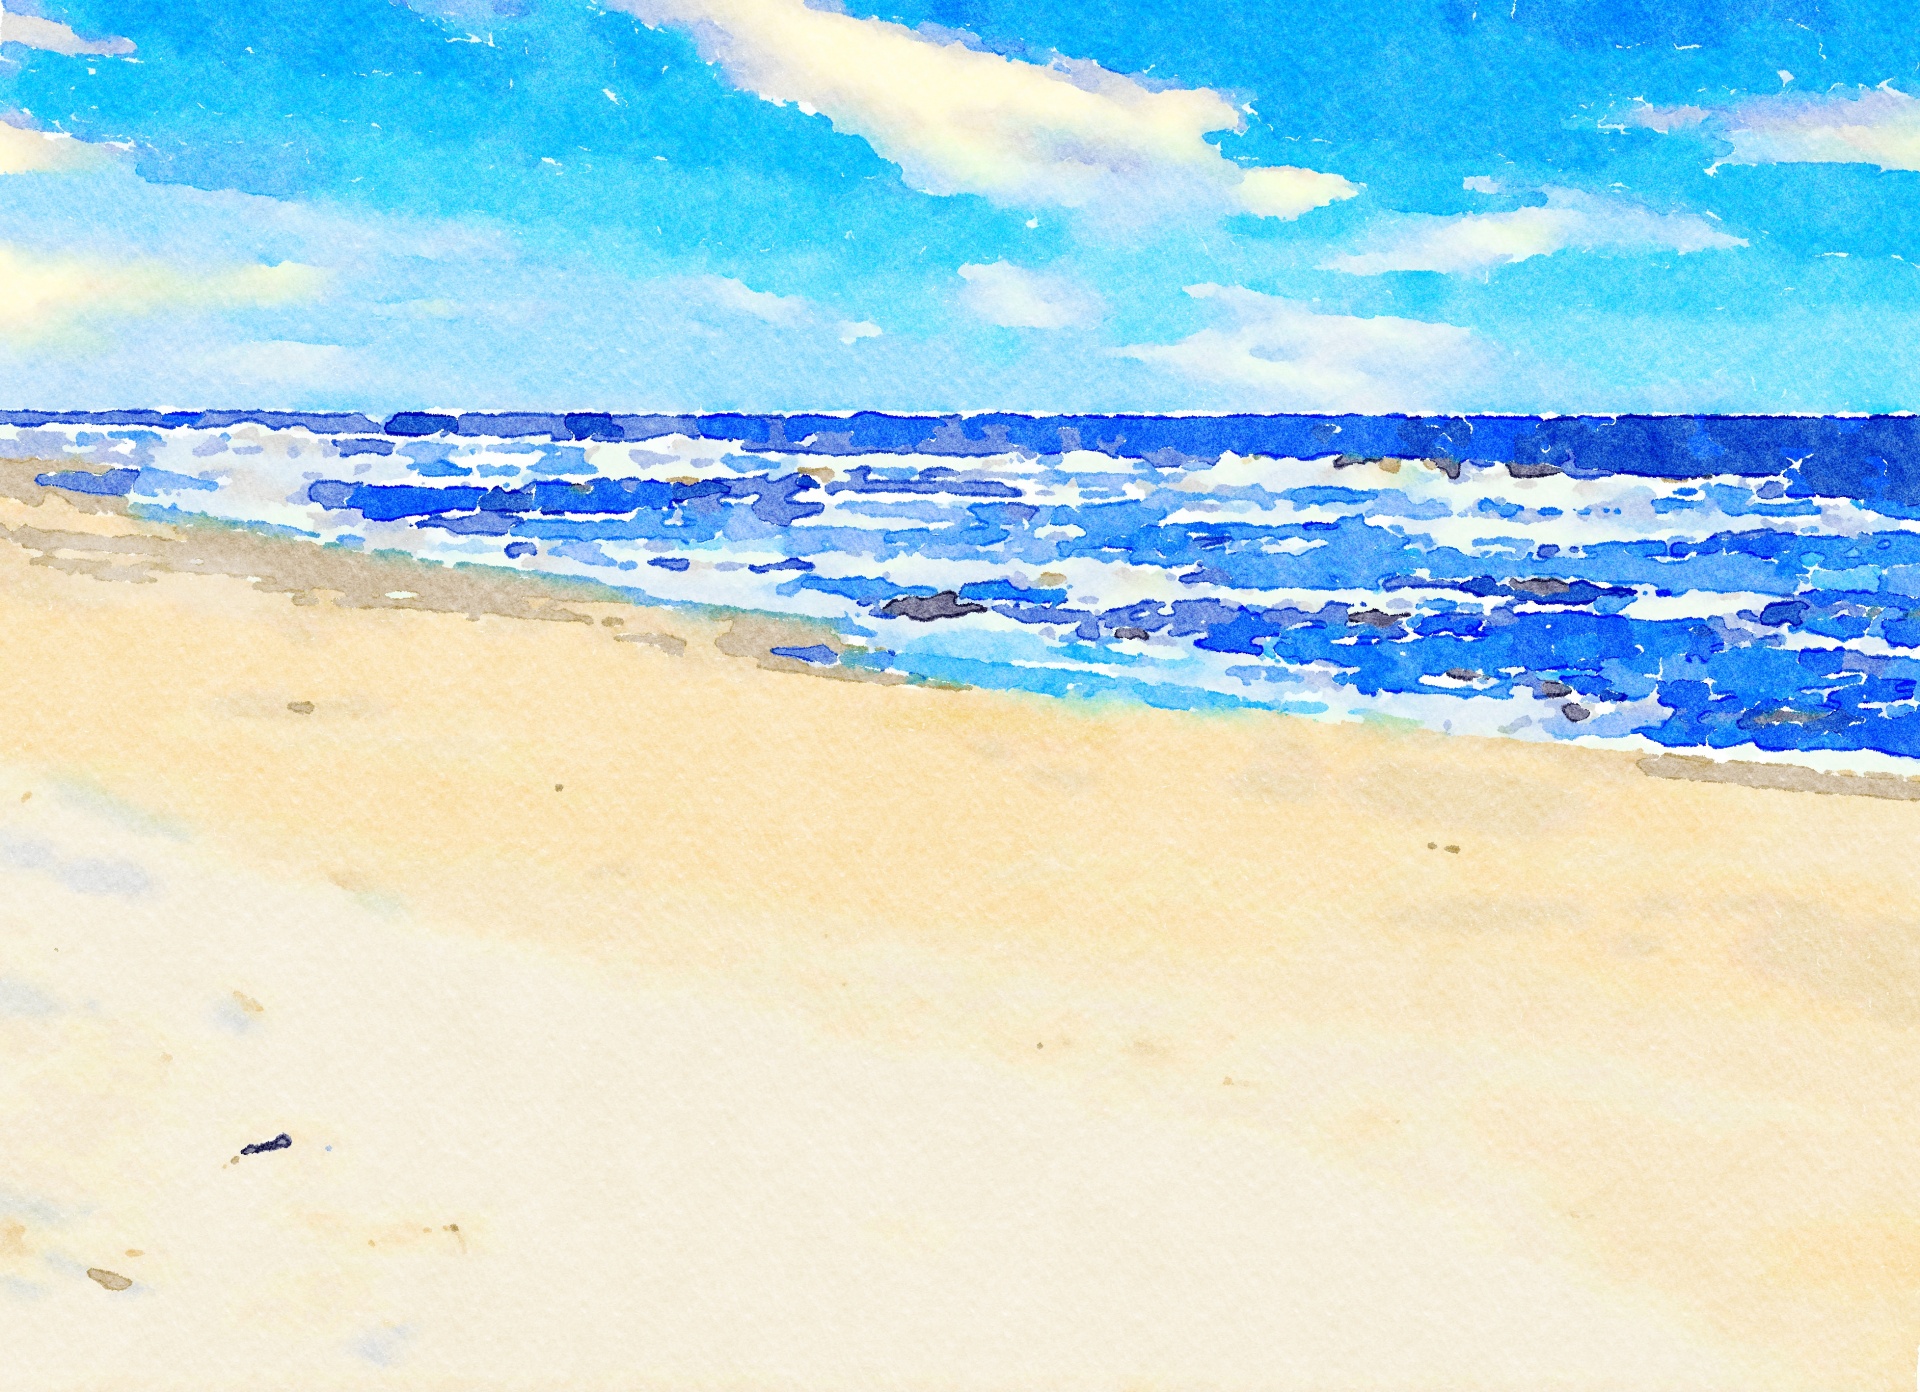 Outer Banks, Ocean painted in Watercolor